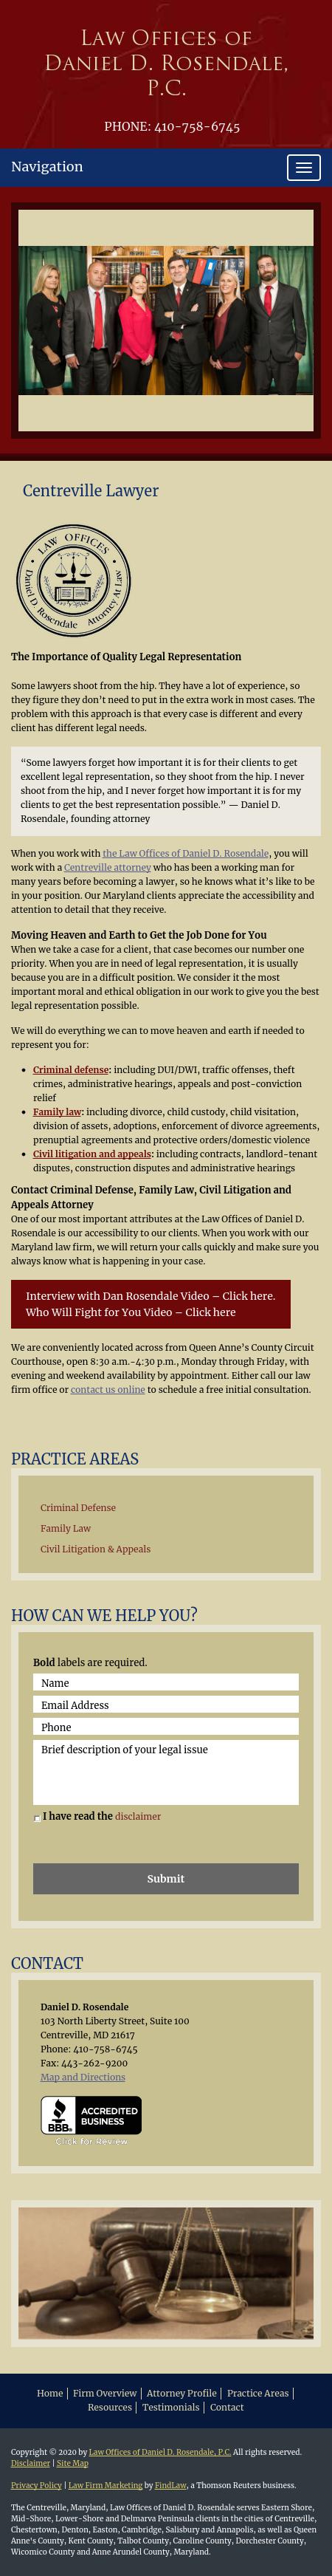 Law Offices of Daniel D. Rosendale, P.C. - Centreville MD Lawyers